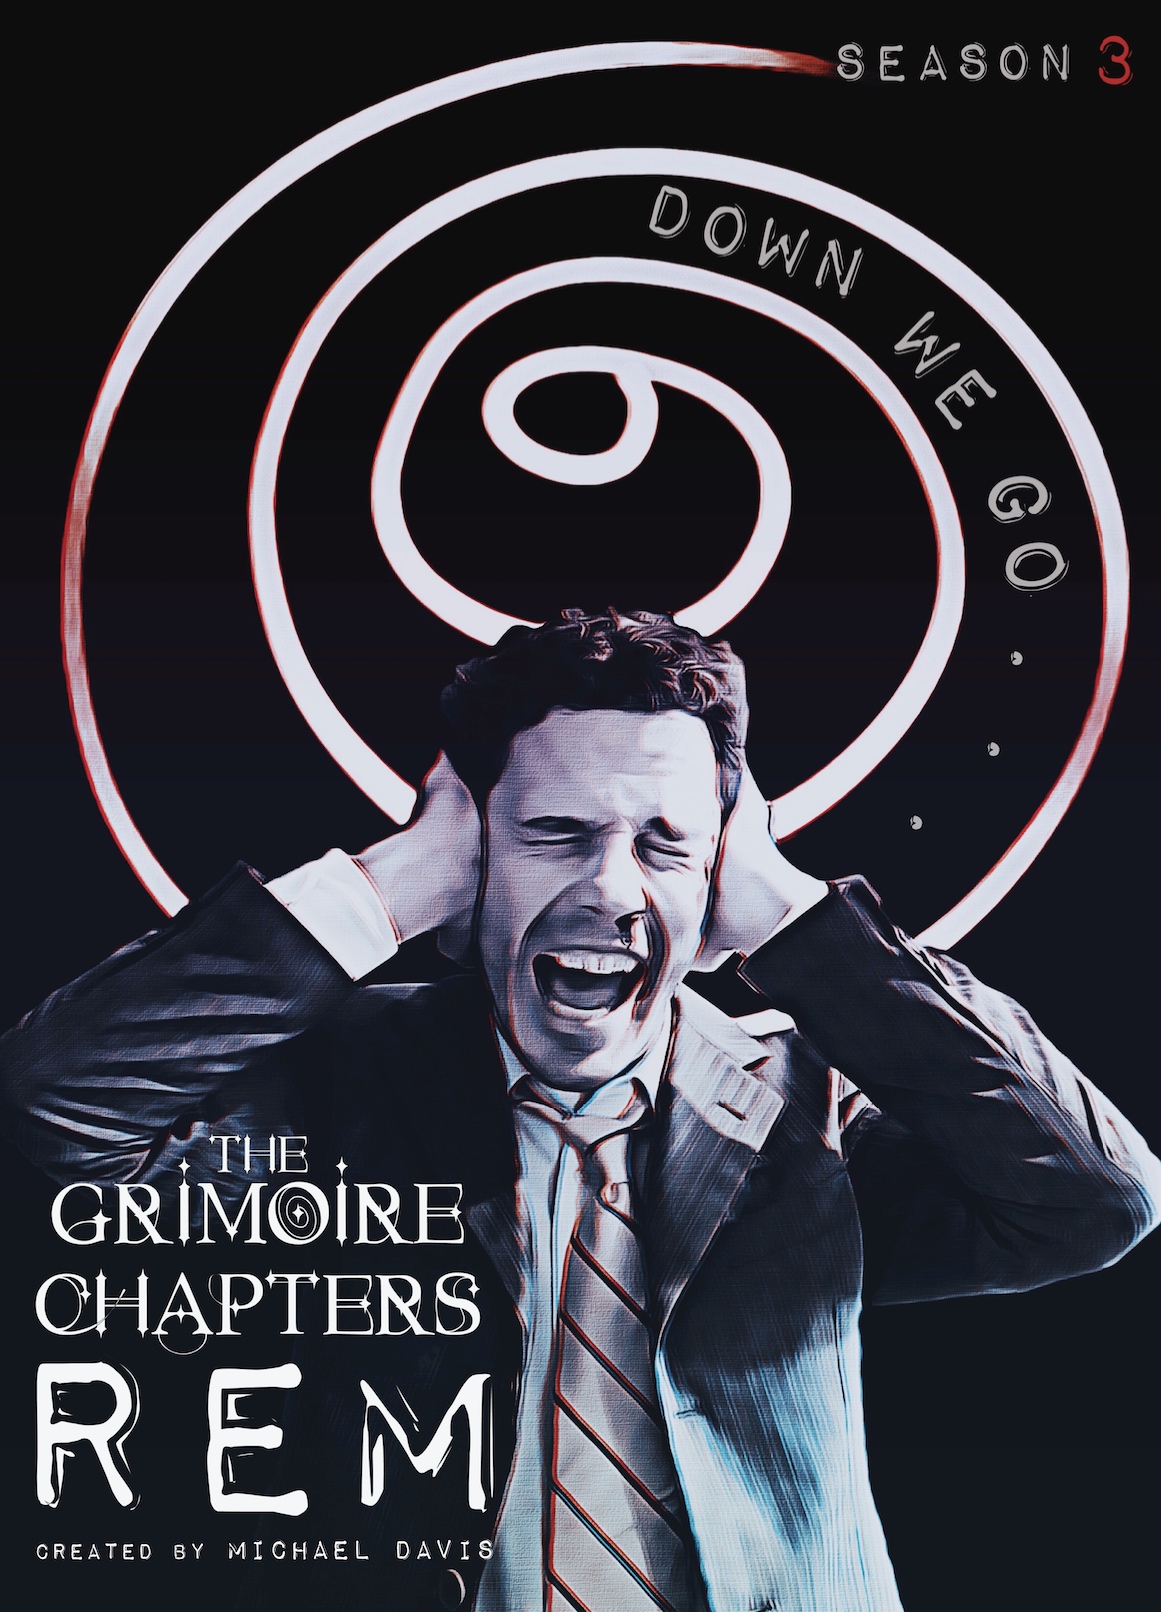 The Grimoire Chapters